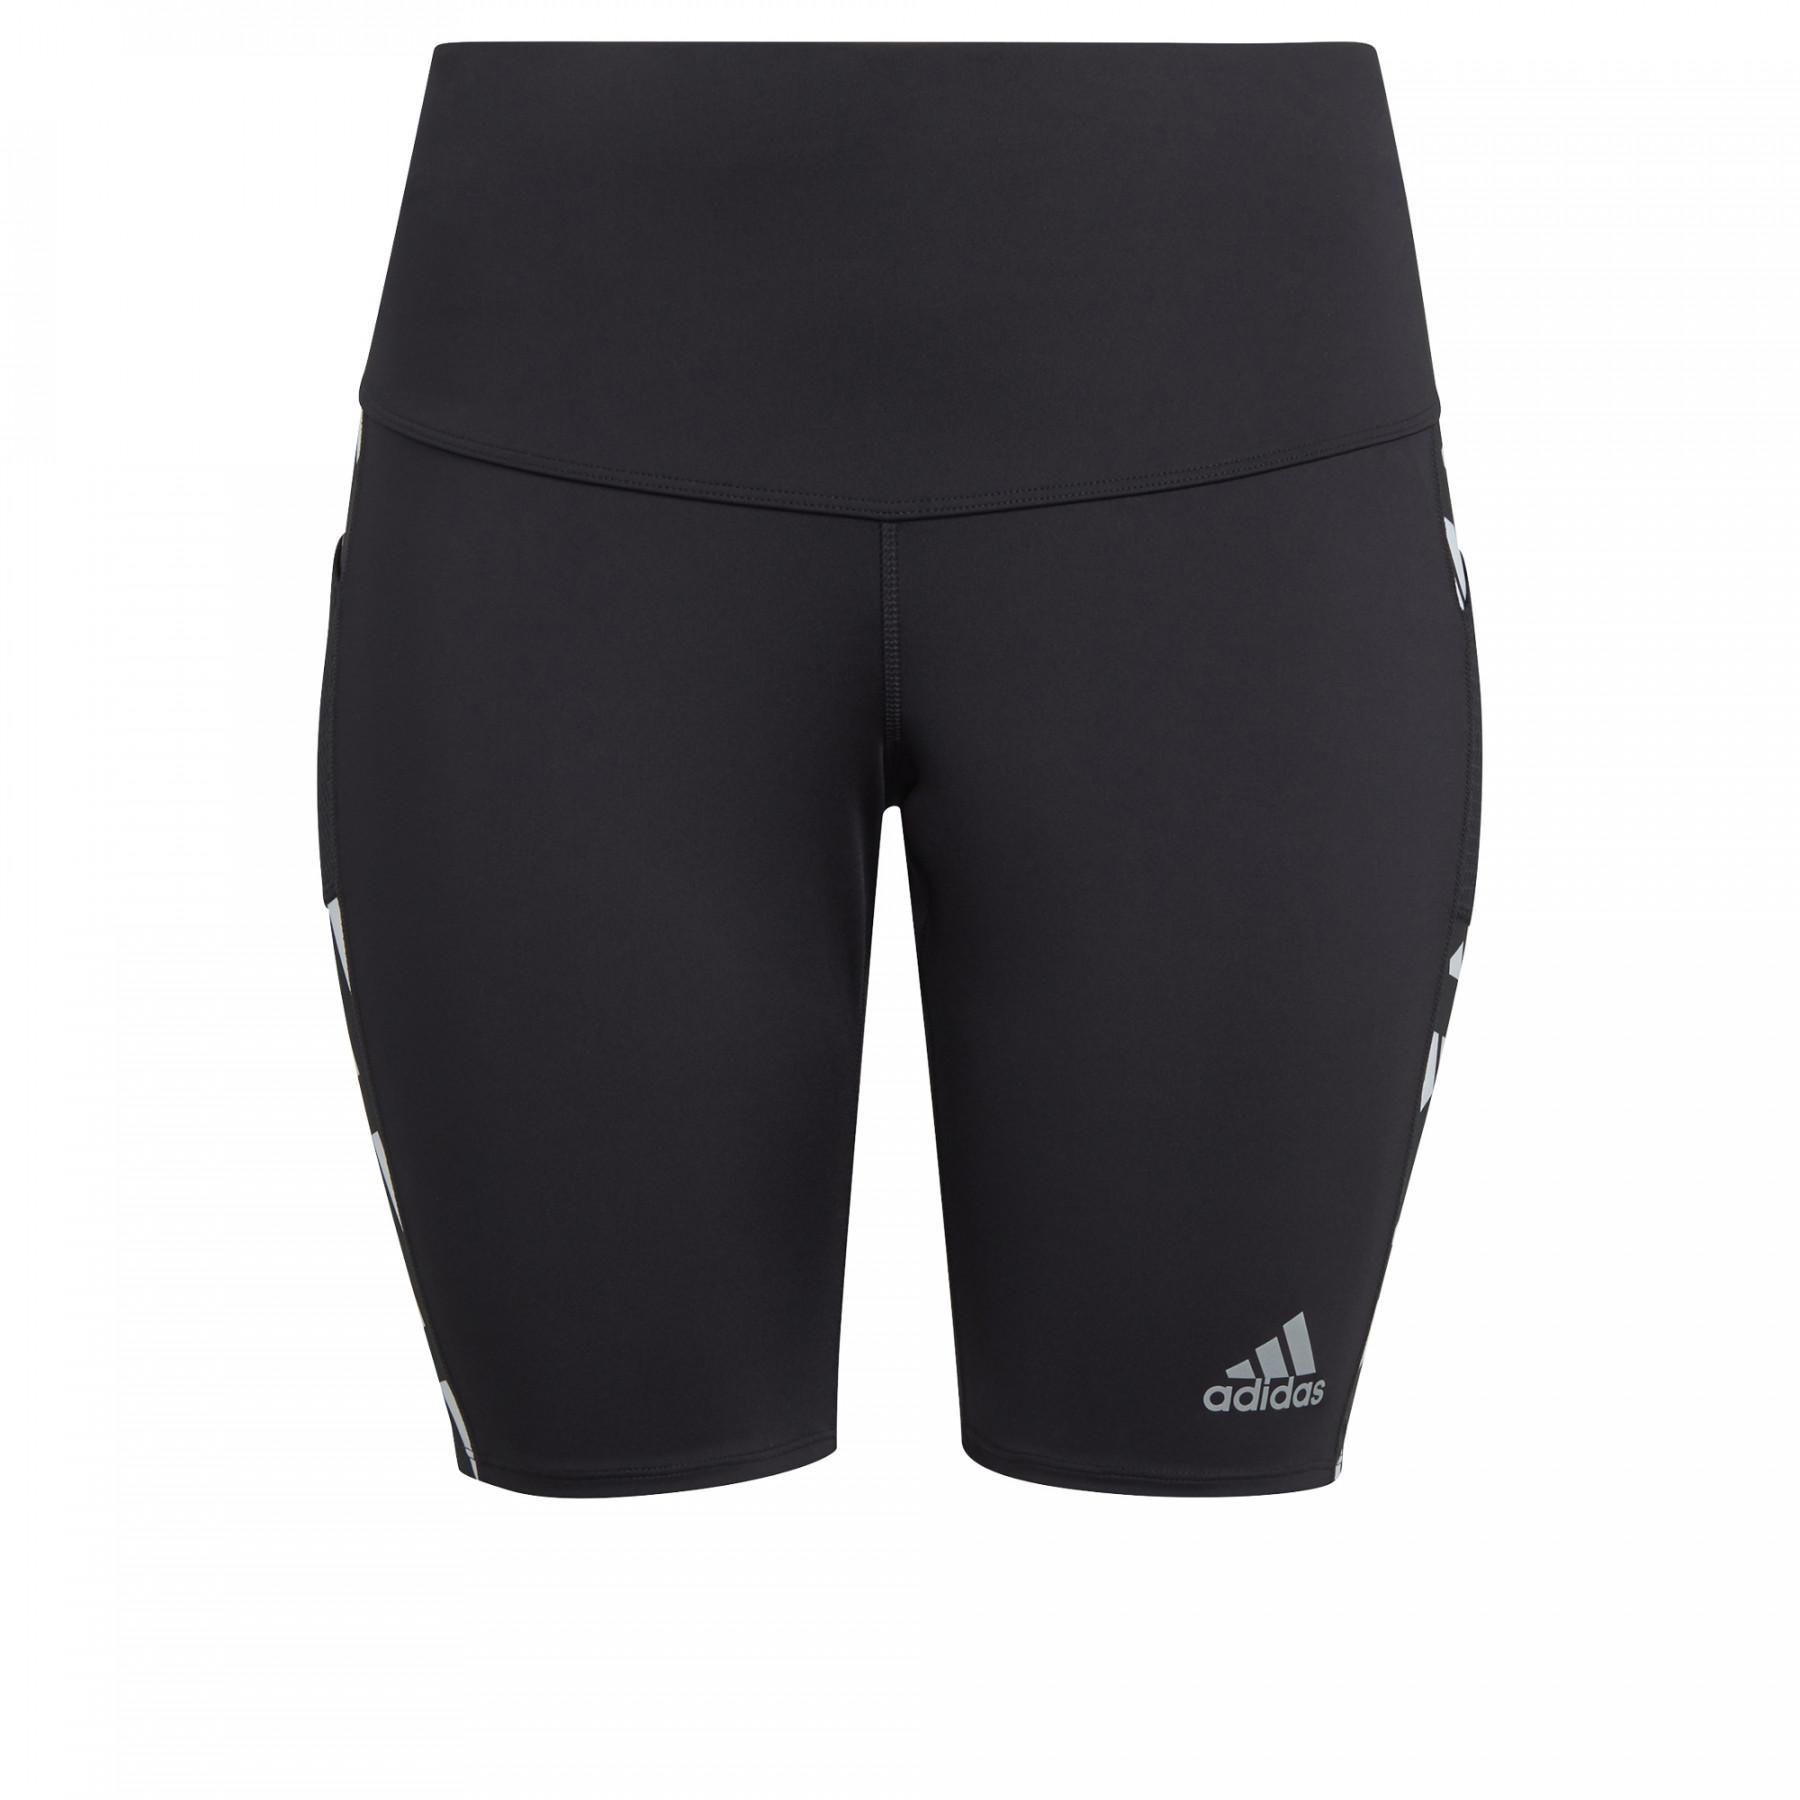 Cycliste femme adidas Own The Run Celebration Running Grande Taille